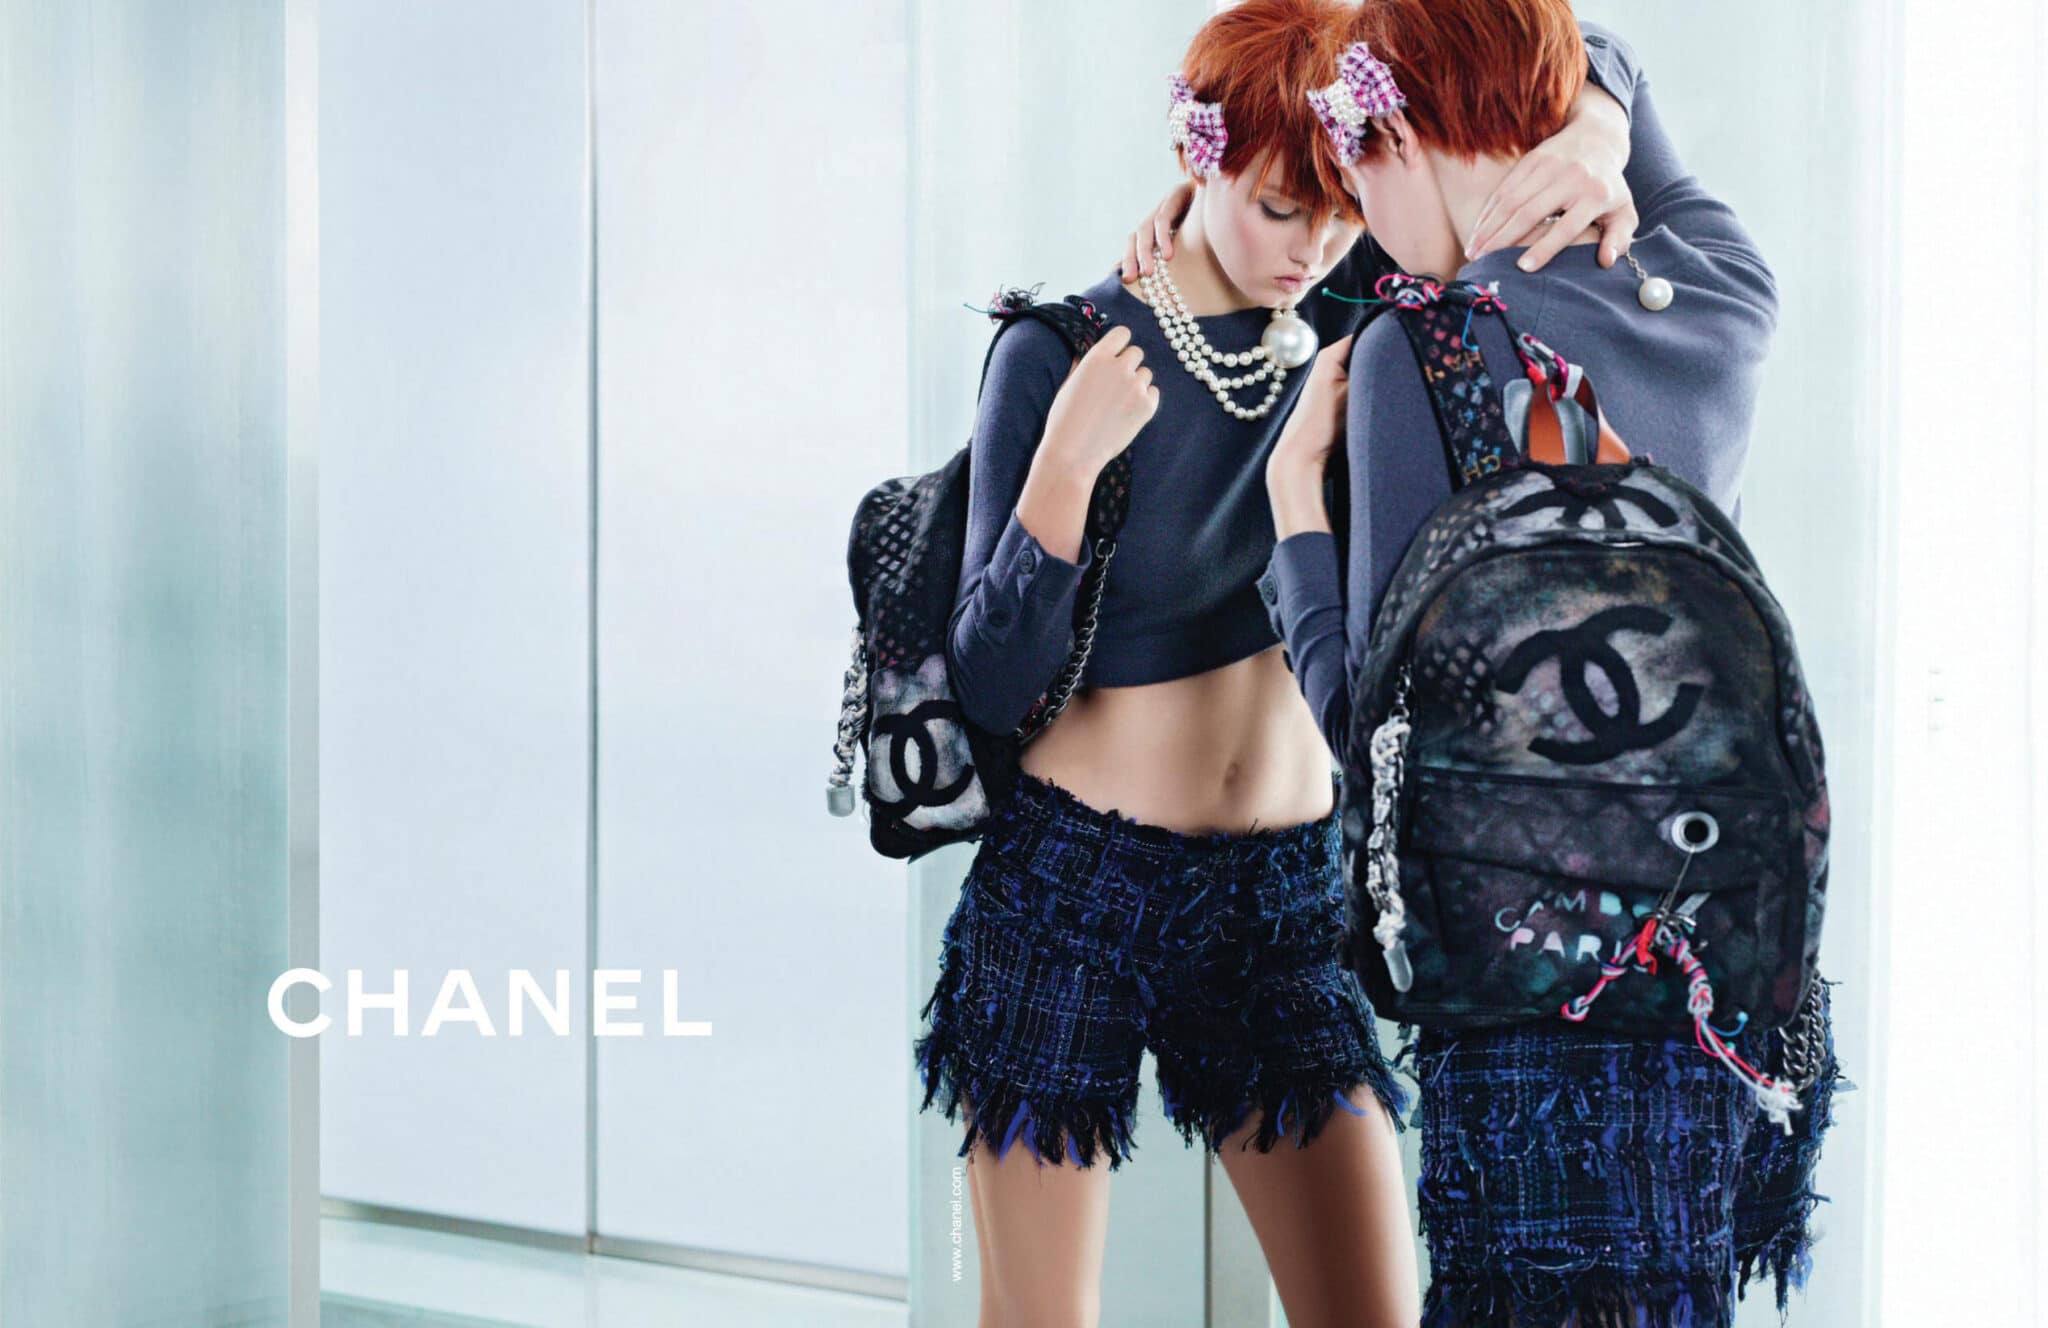 Chanel Spring Summer 2014 Ad Campaign - More Photos 5